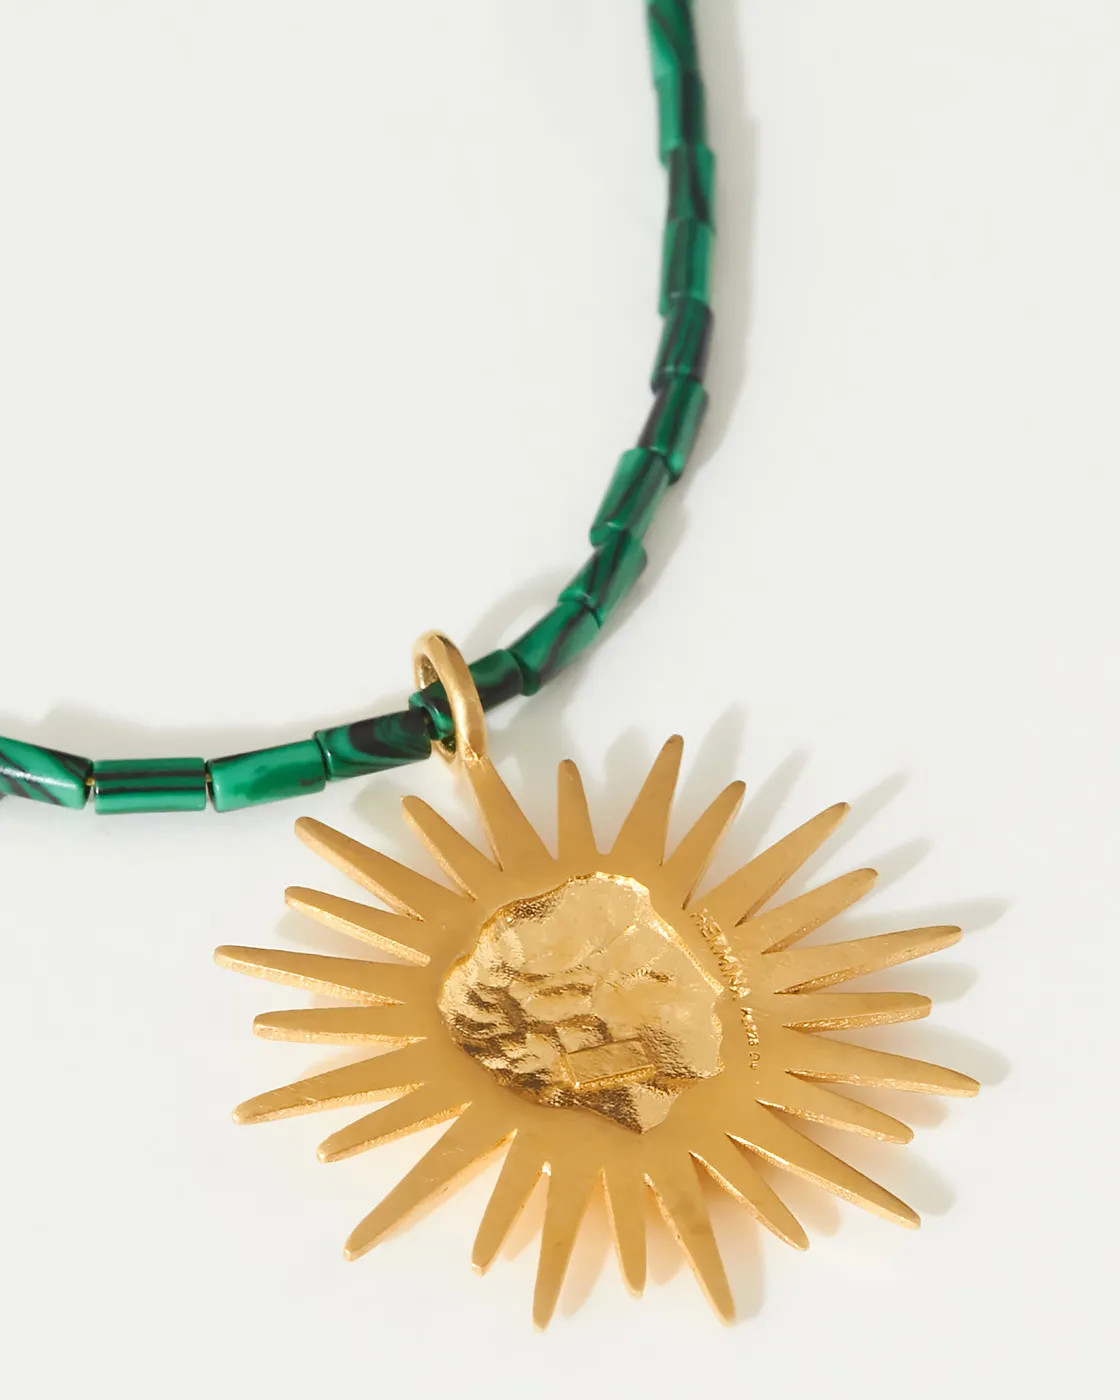 Sun Tarot Gemstone Pine Necklace with Gold-Plated Pendant